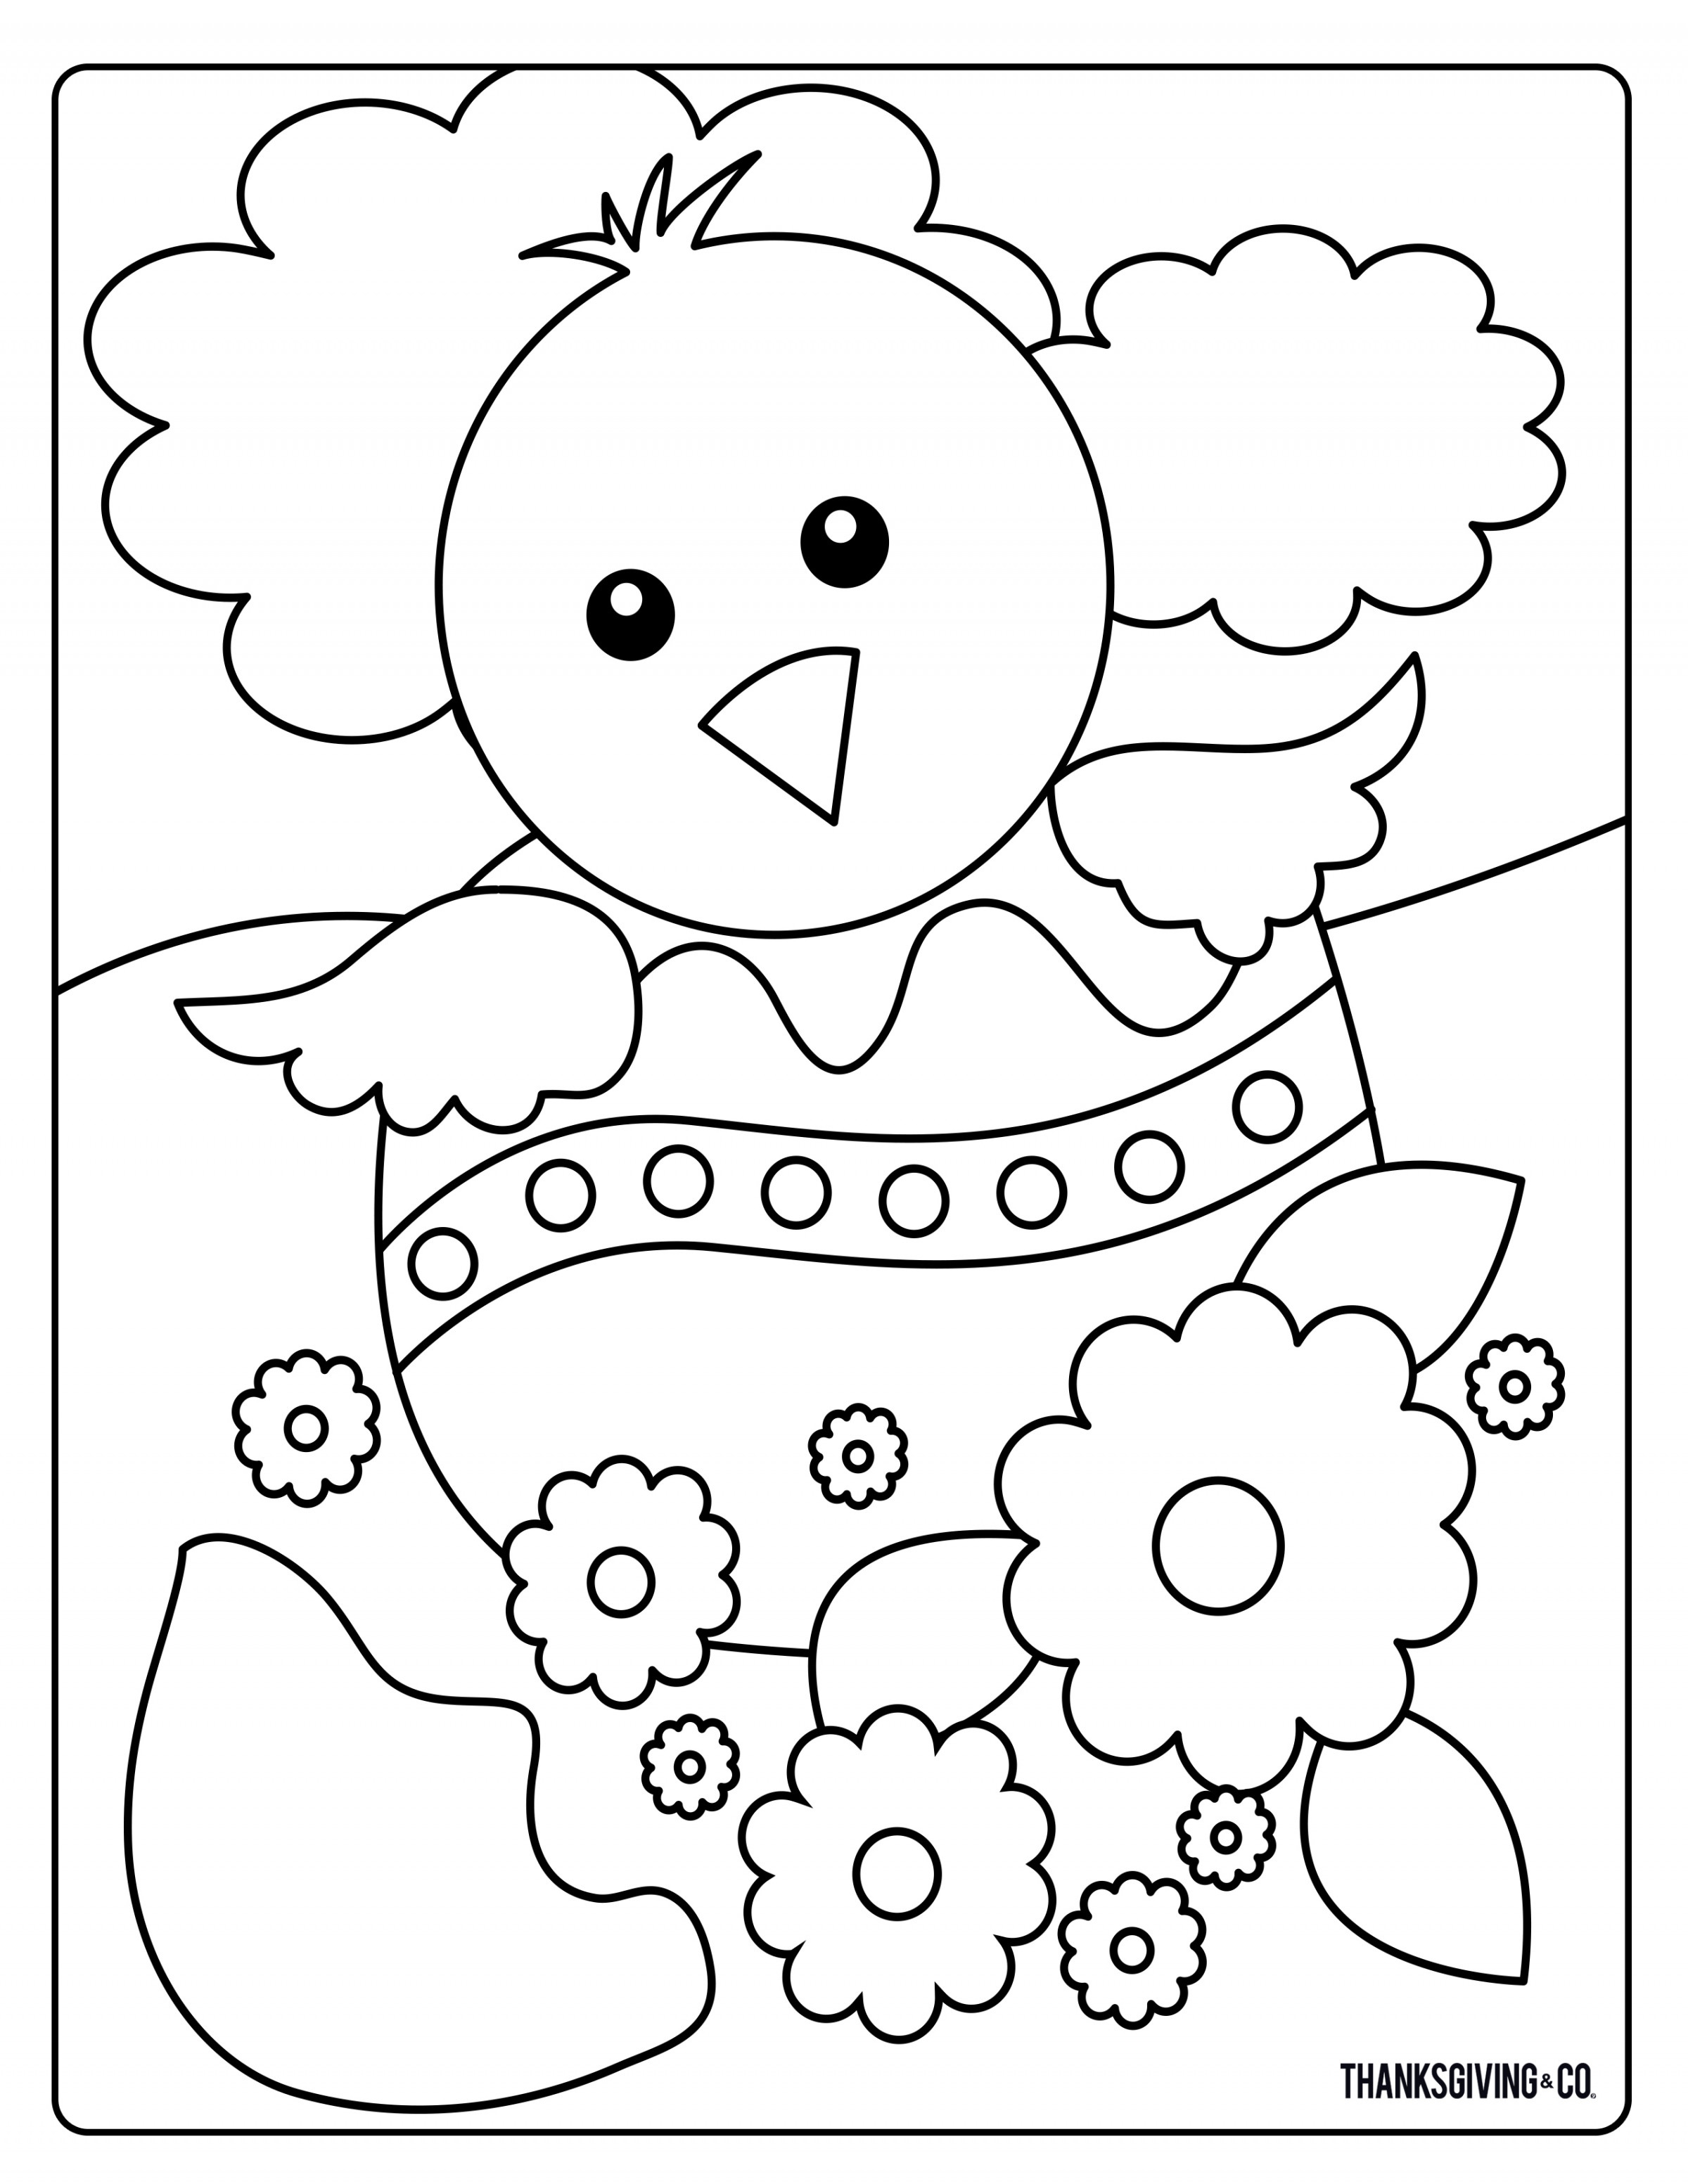 Easter Colouring Sheets Free Printable